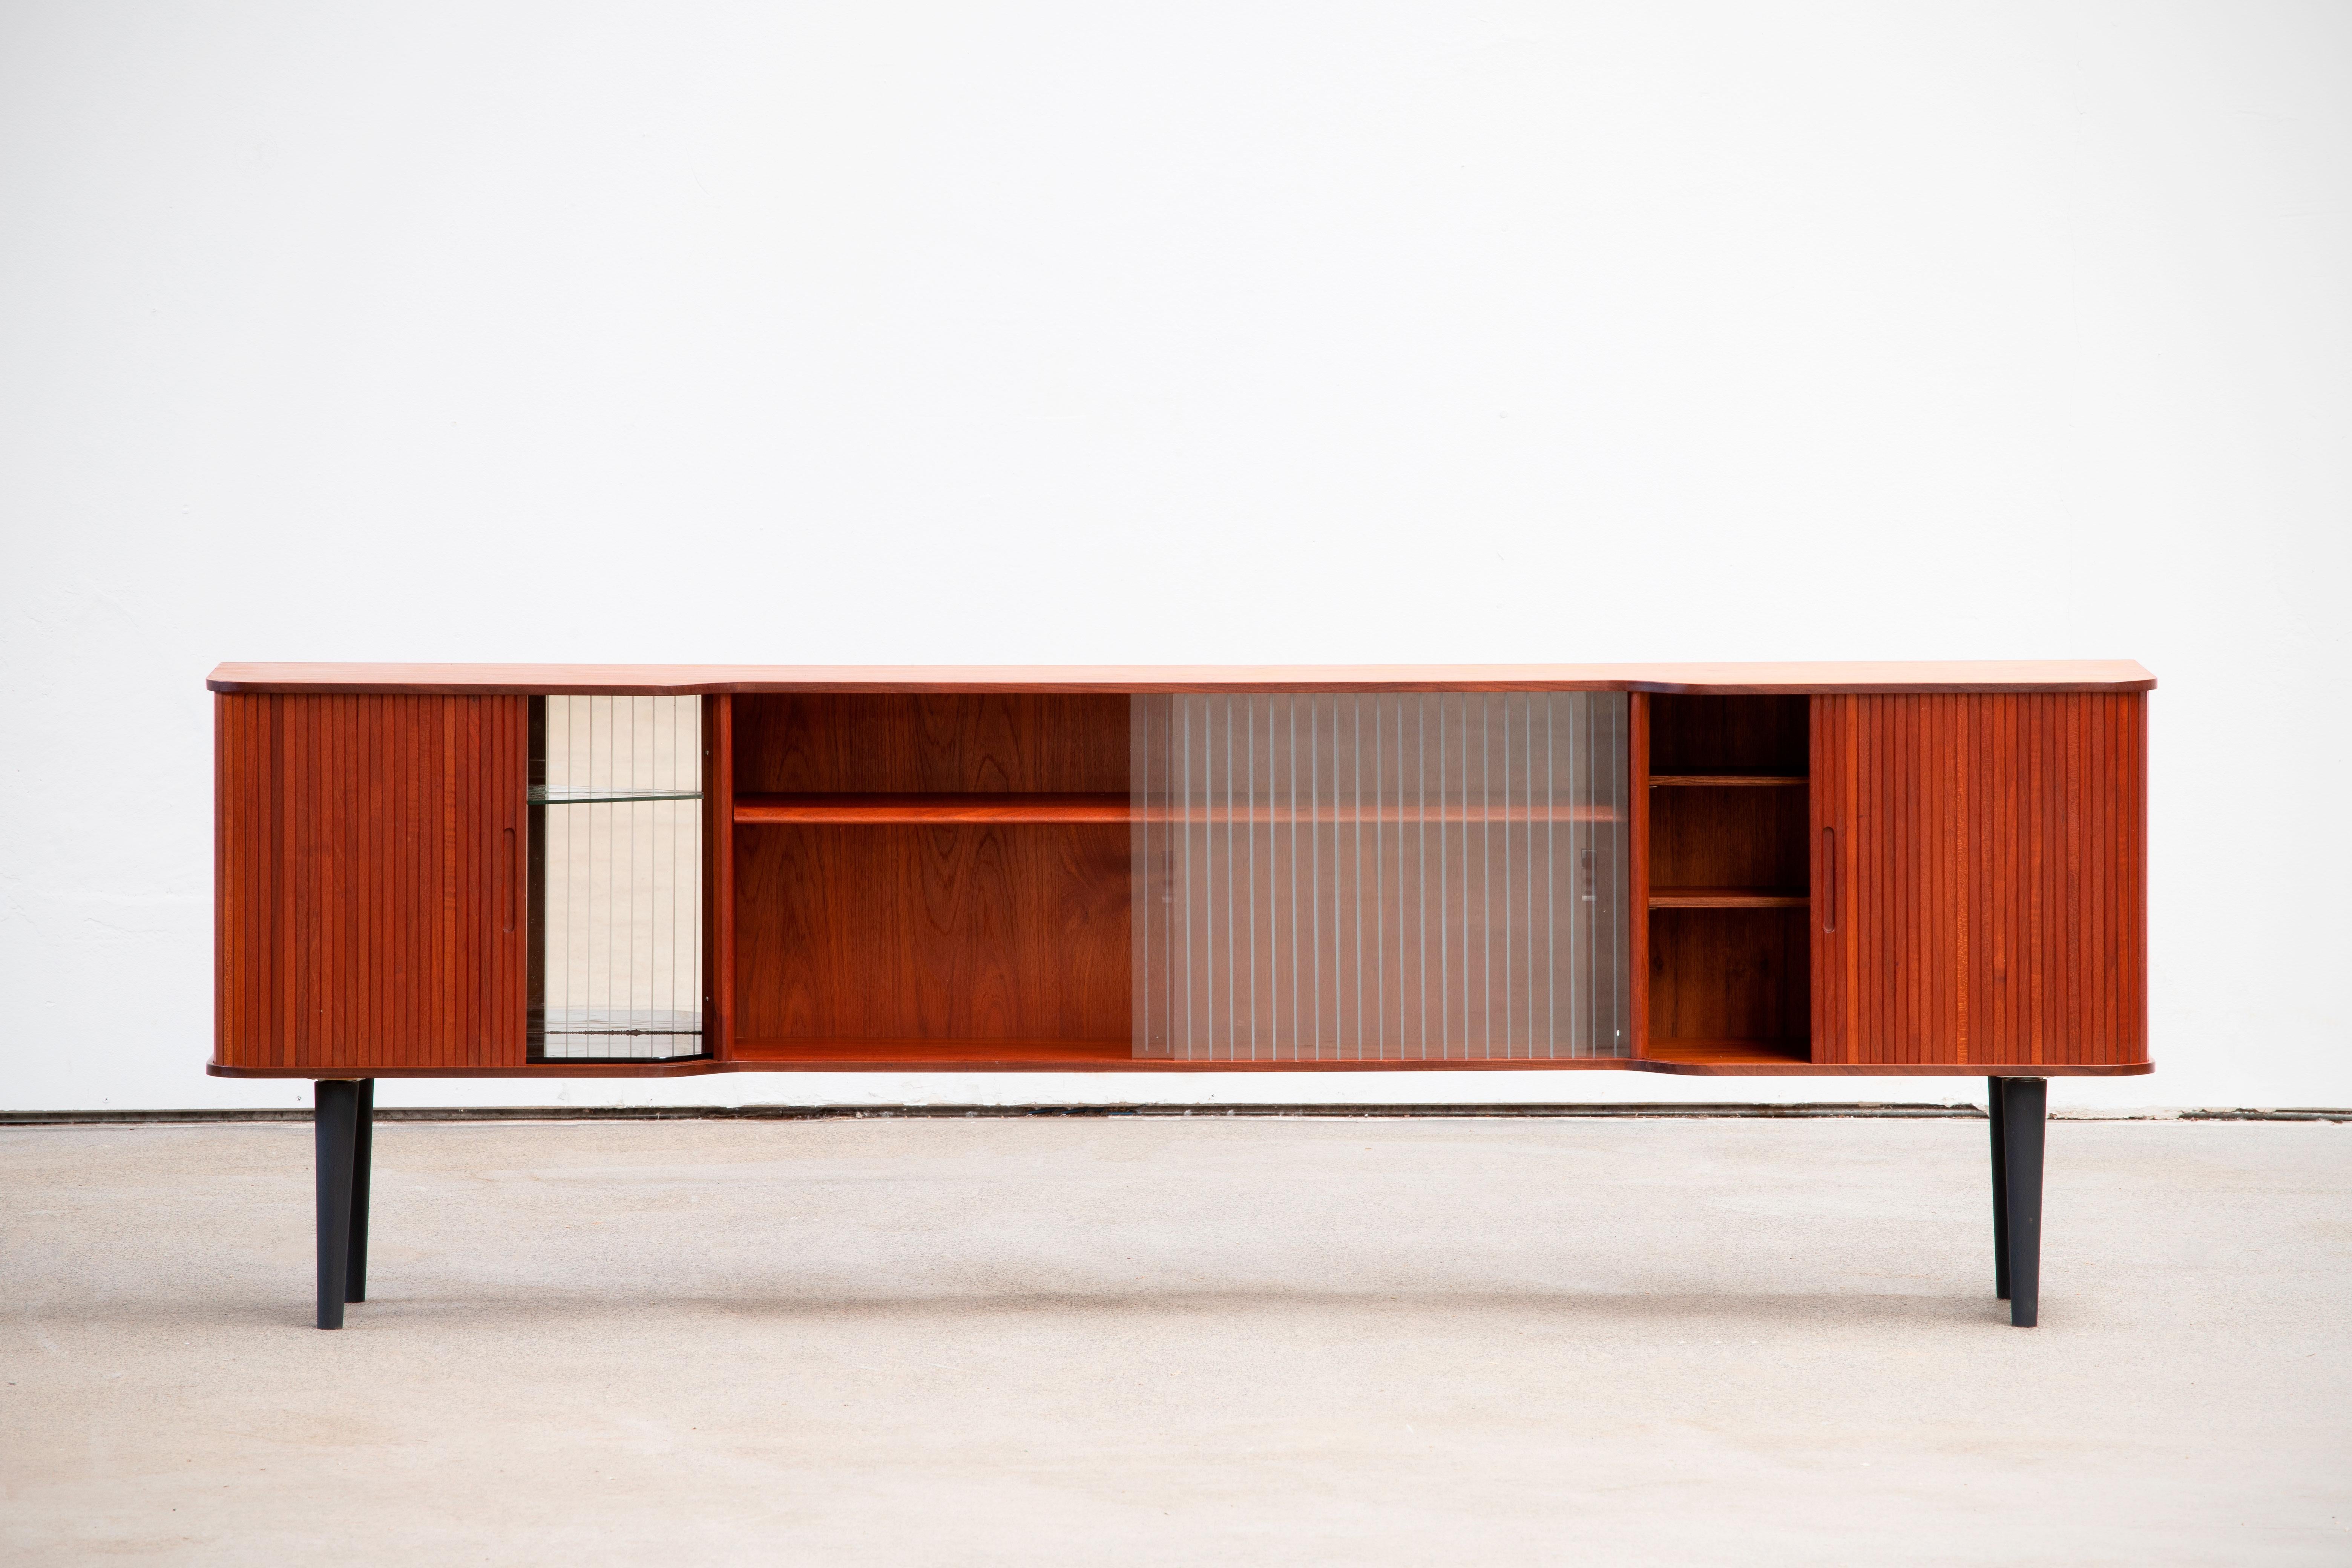 Midcentury teak sideboard with tambour doors from the 1960s. It is a shining example of the form and function synonymous with furniture of this era. It has is all; well-built, great design and heaviness. four sliding doors storage space. The minimal